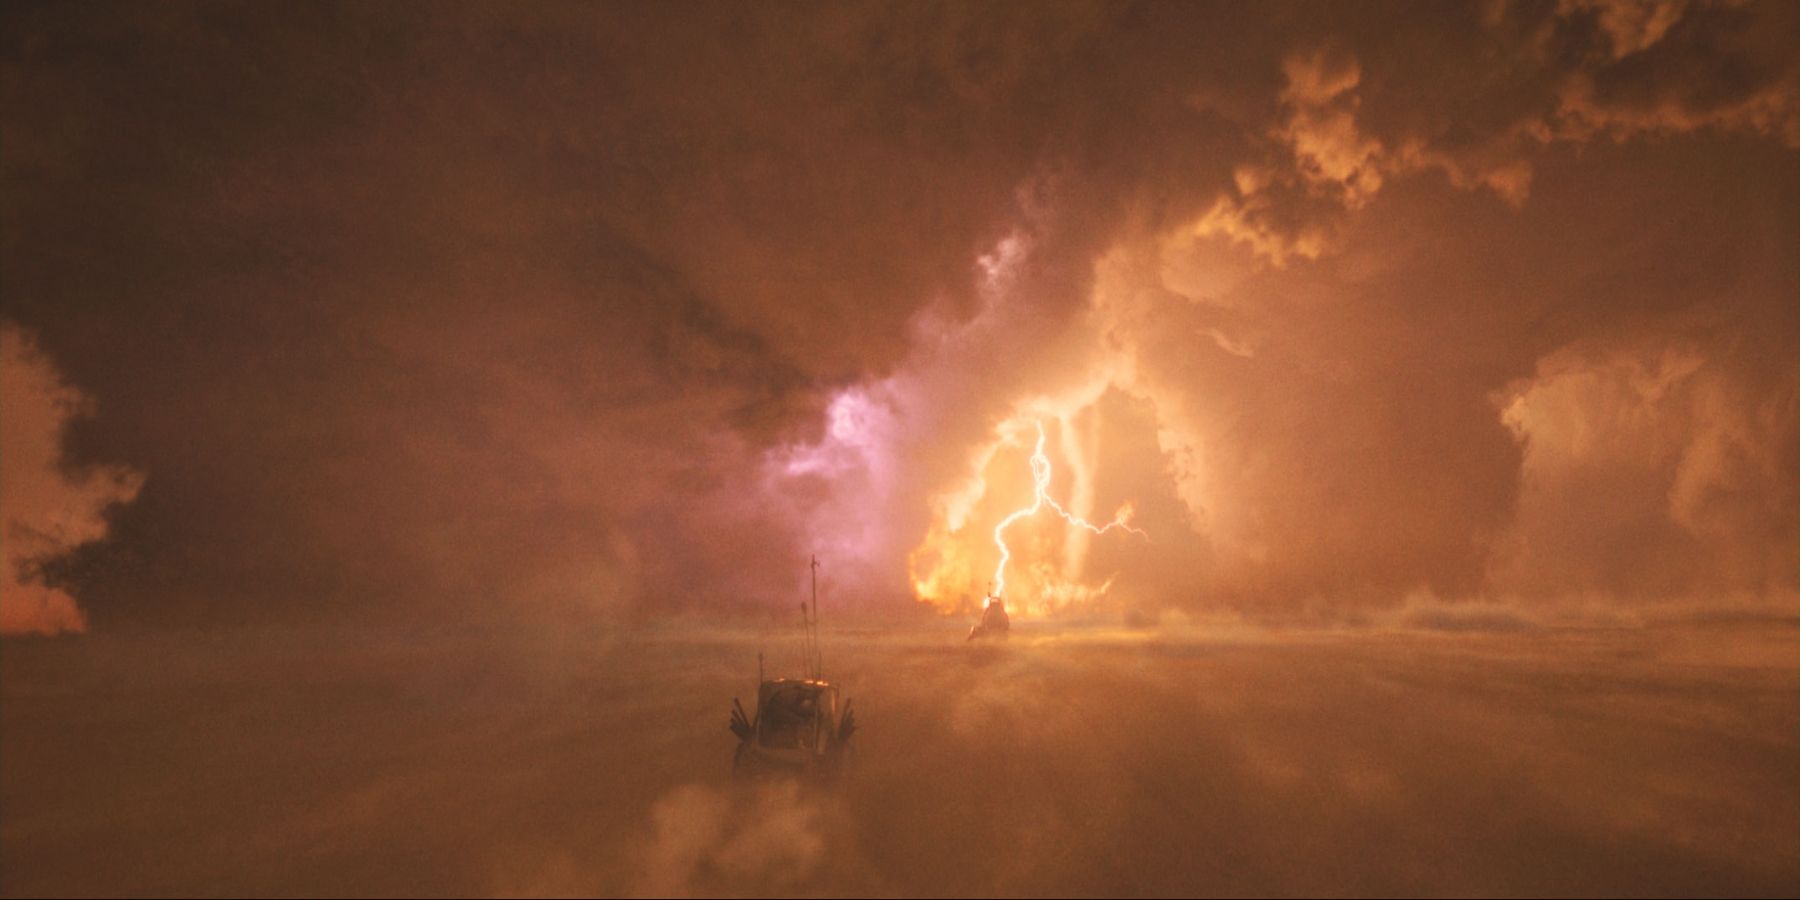 Mad Max Storm nux chasing the war rig through a storm